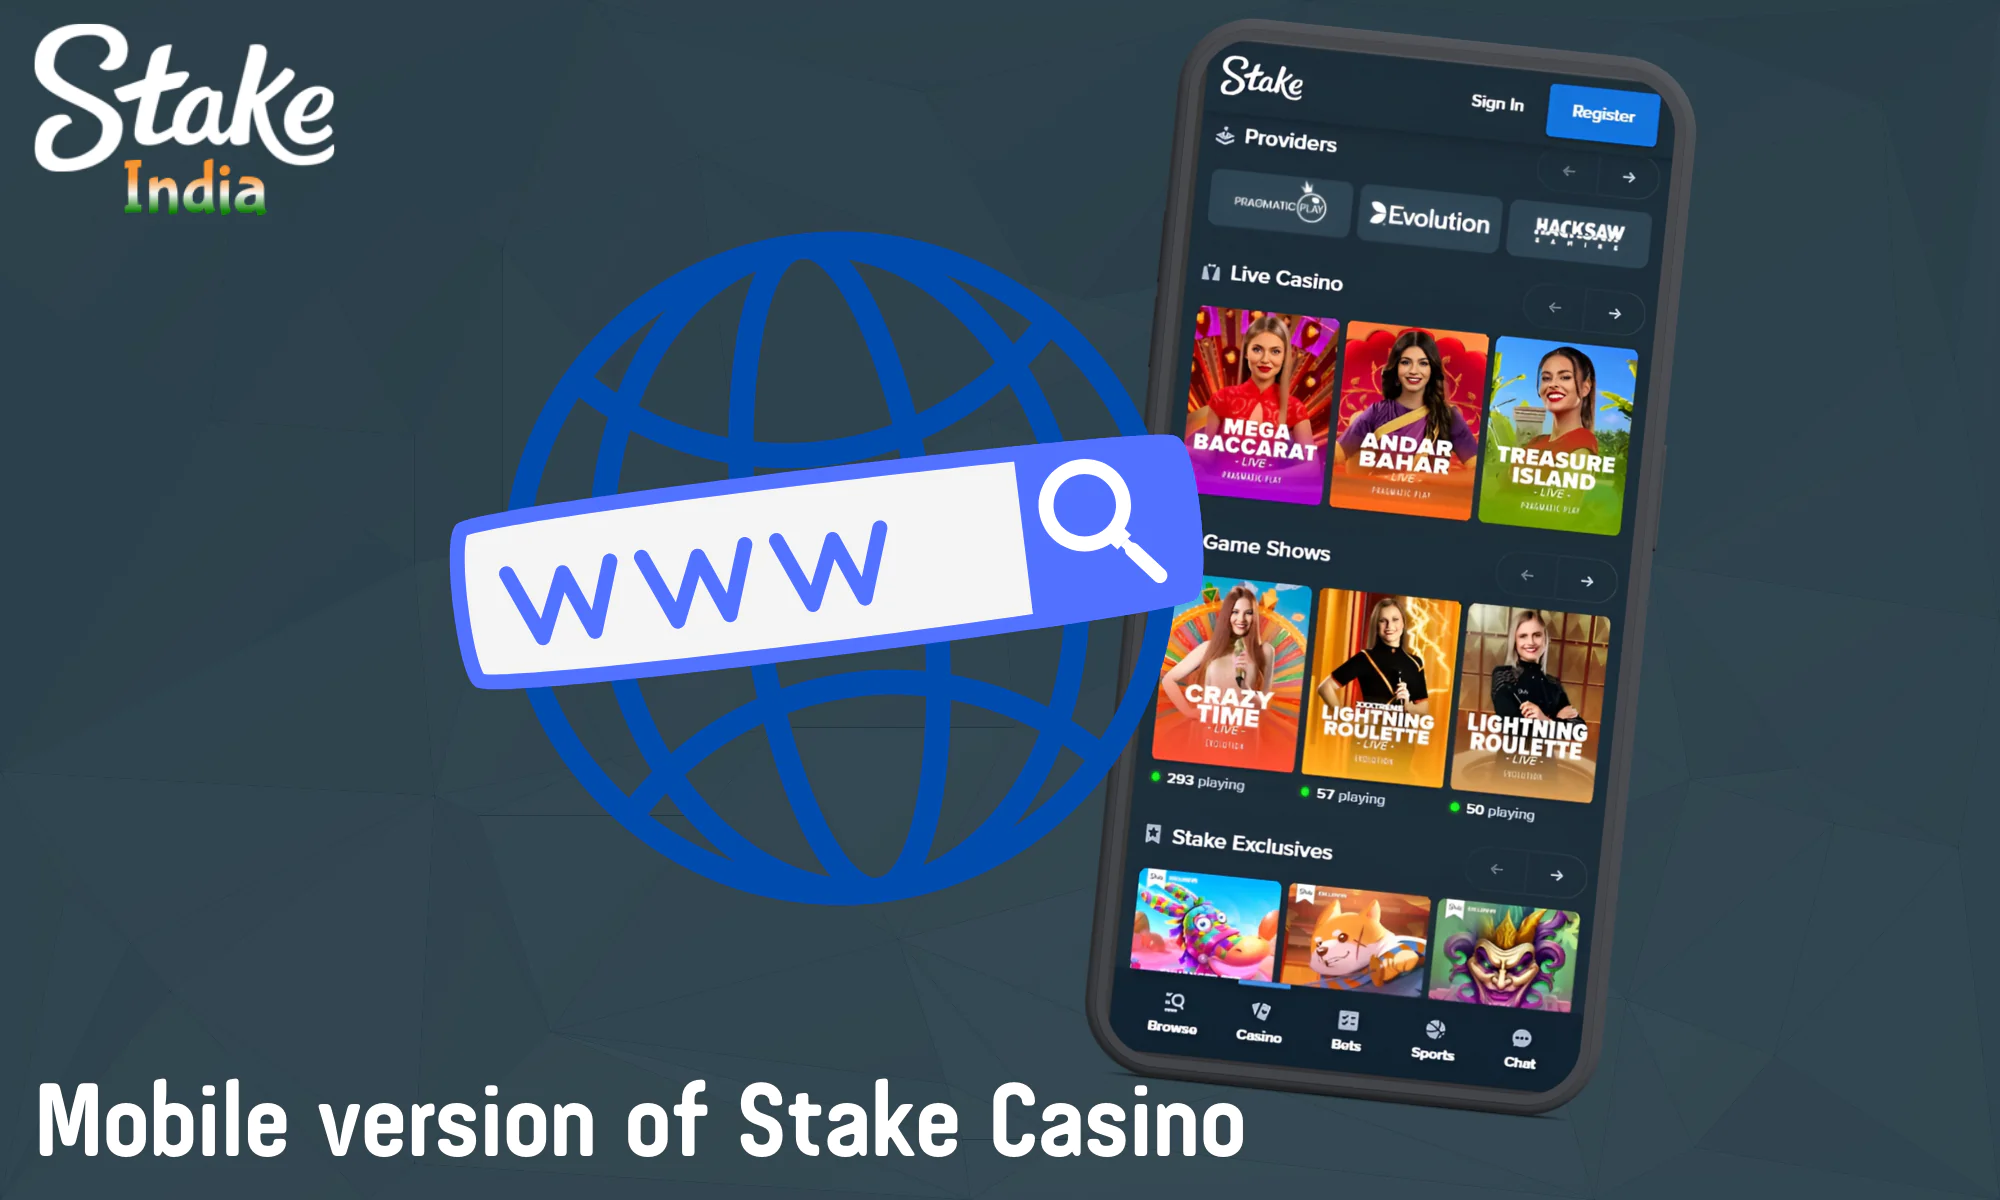 Stake casino has a special mobile version available in the browser